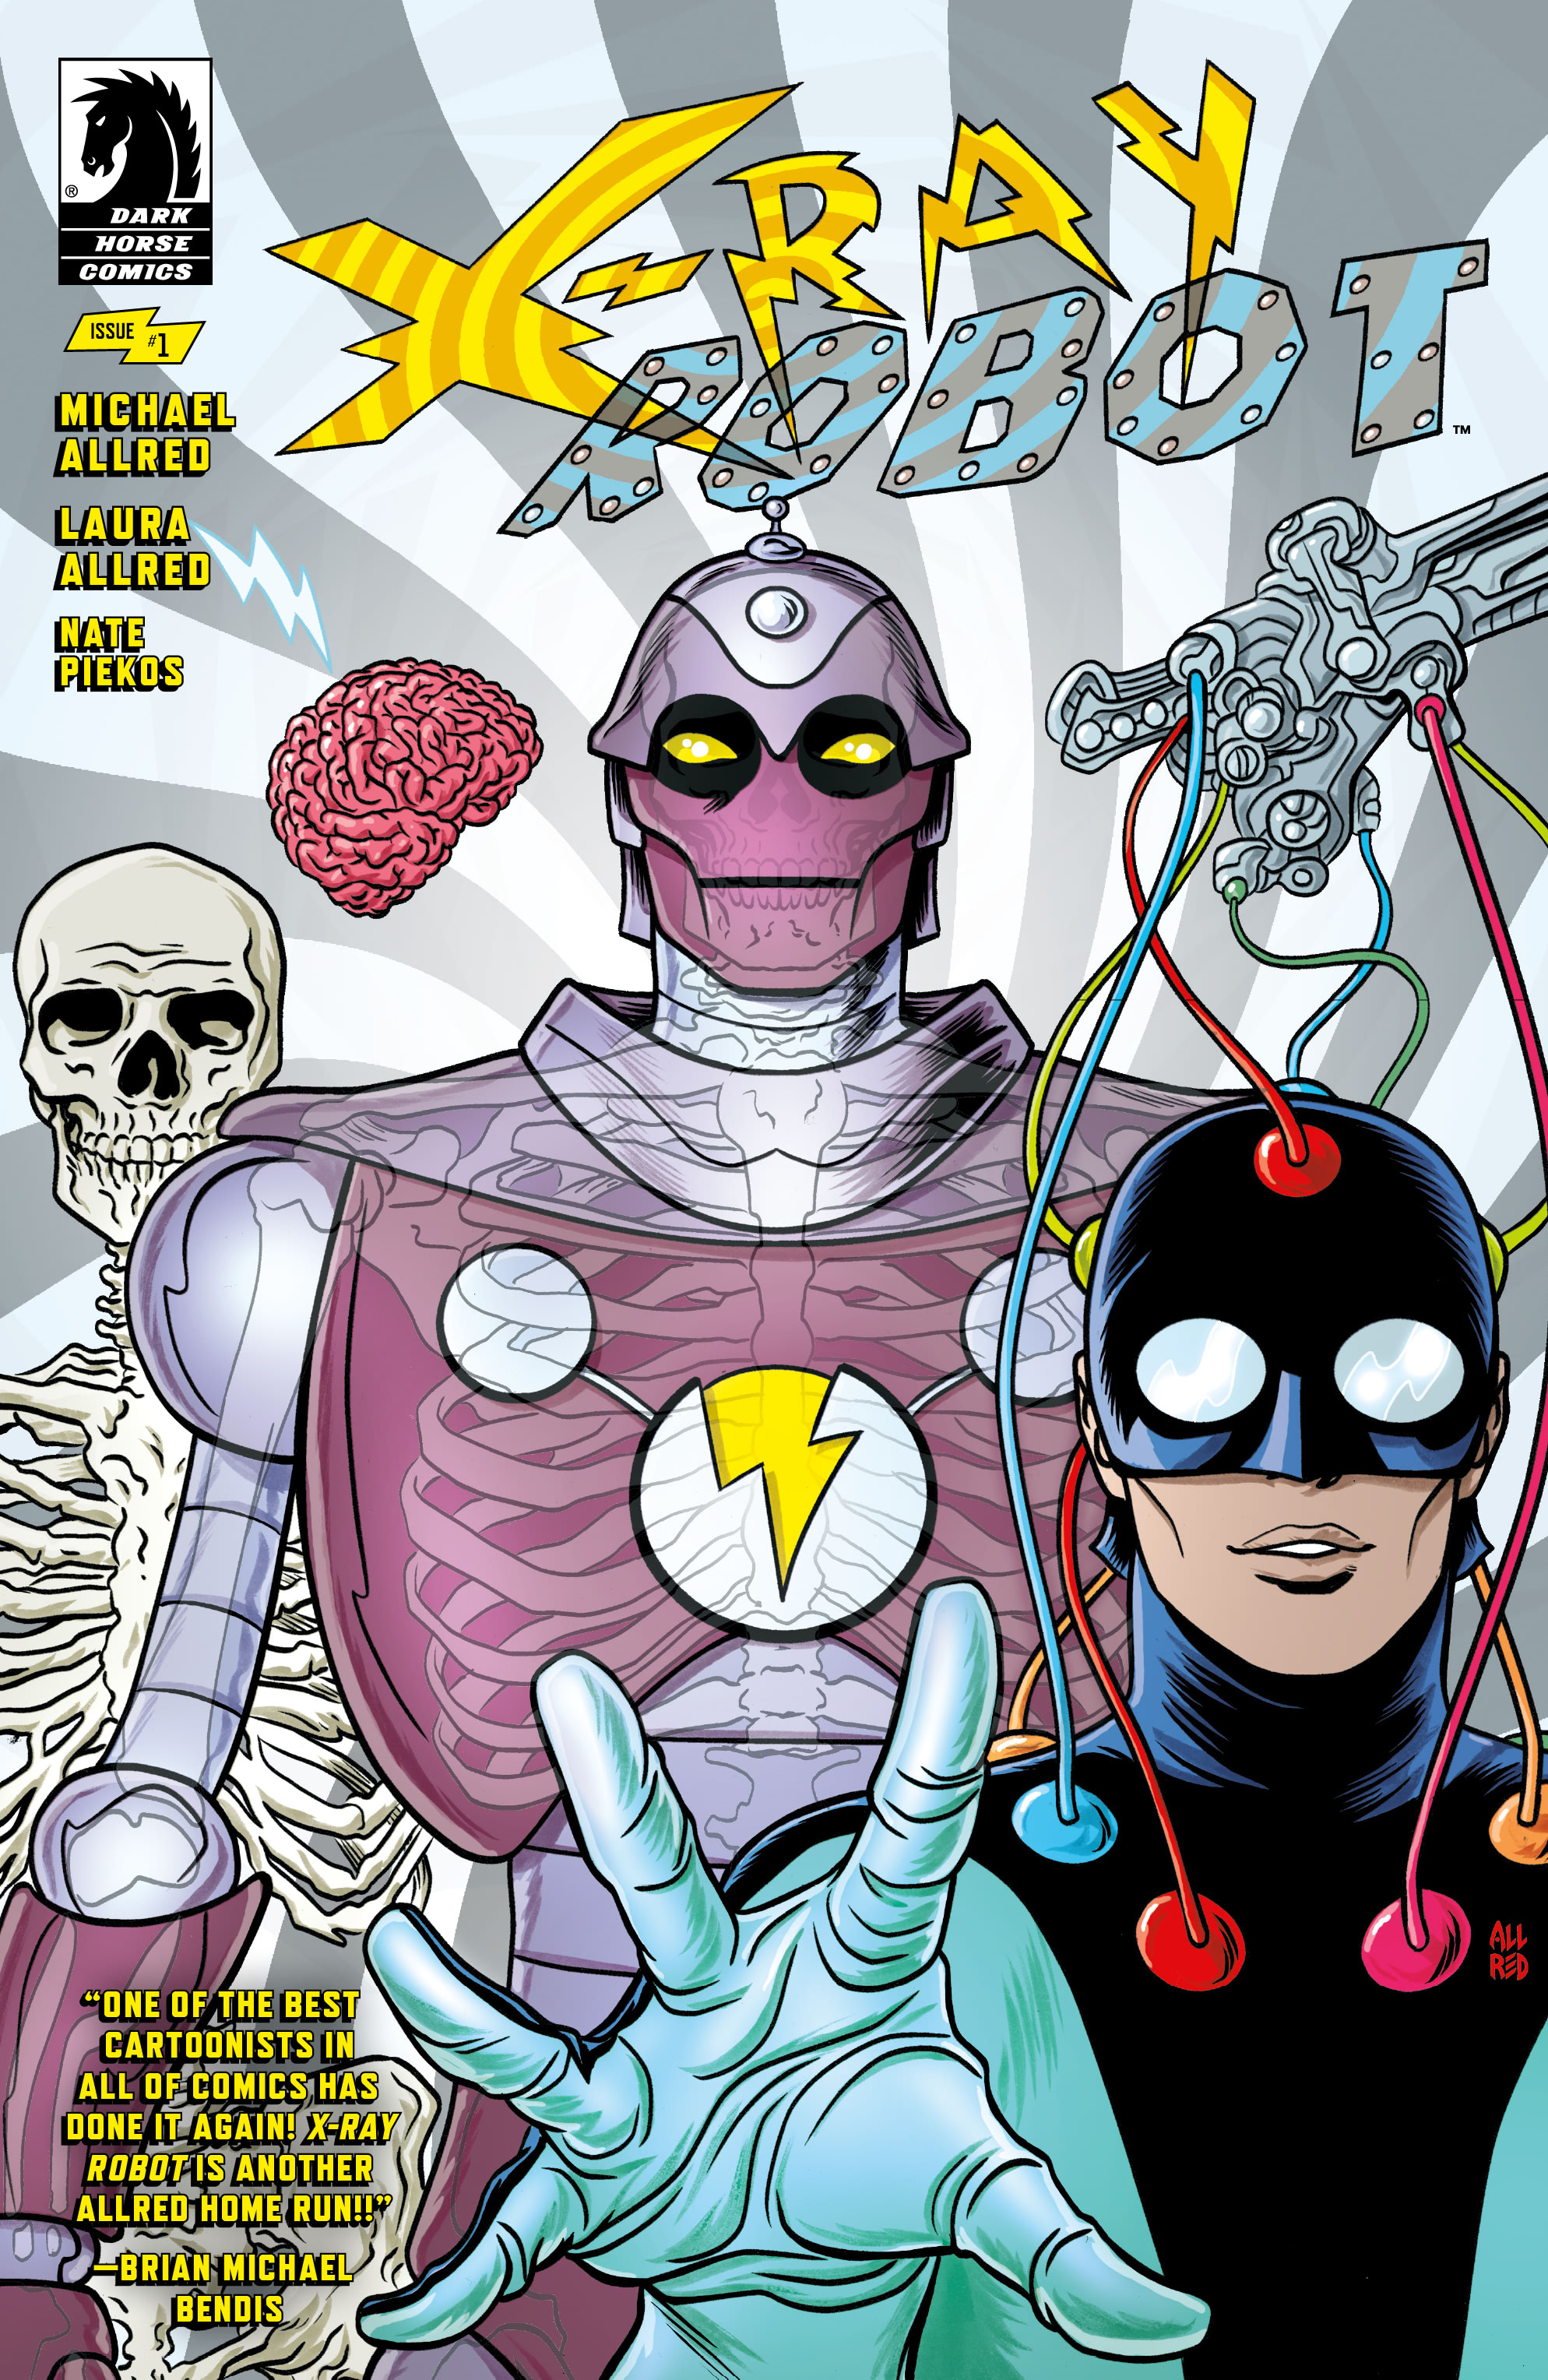 Read online X-RAY ROBOT comic -  Issue #1 - 1